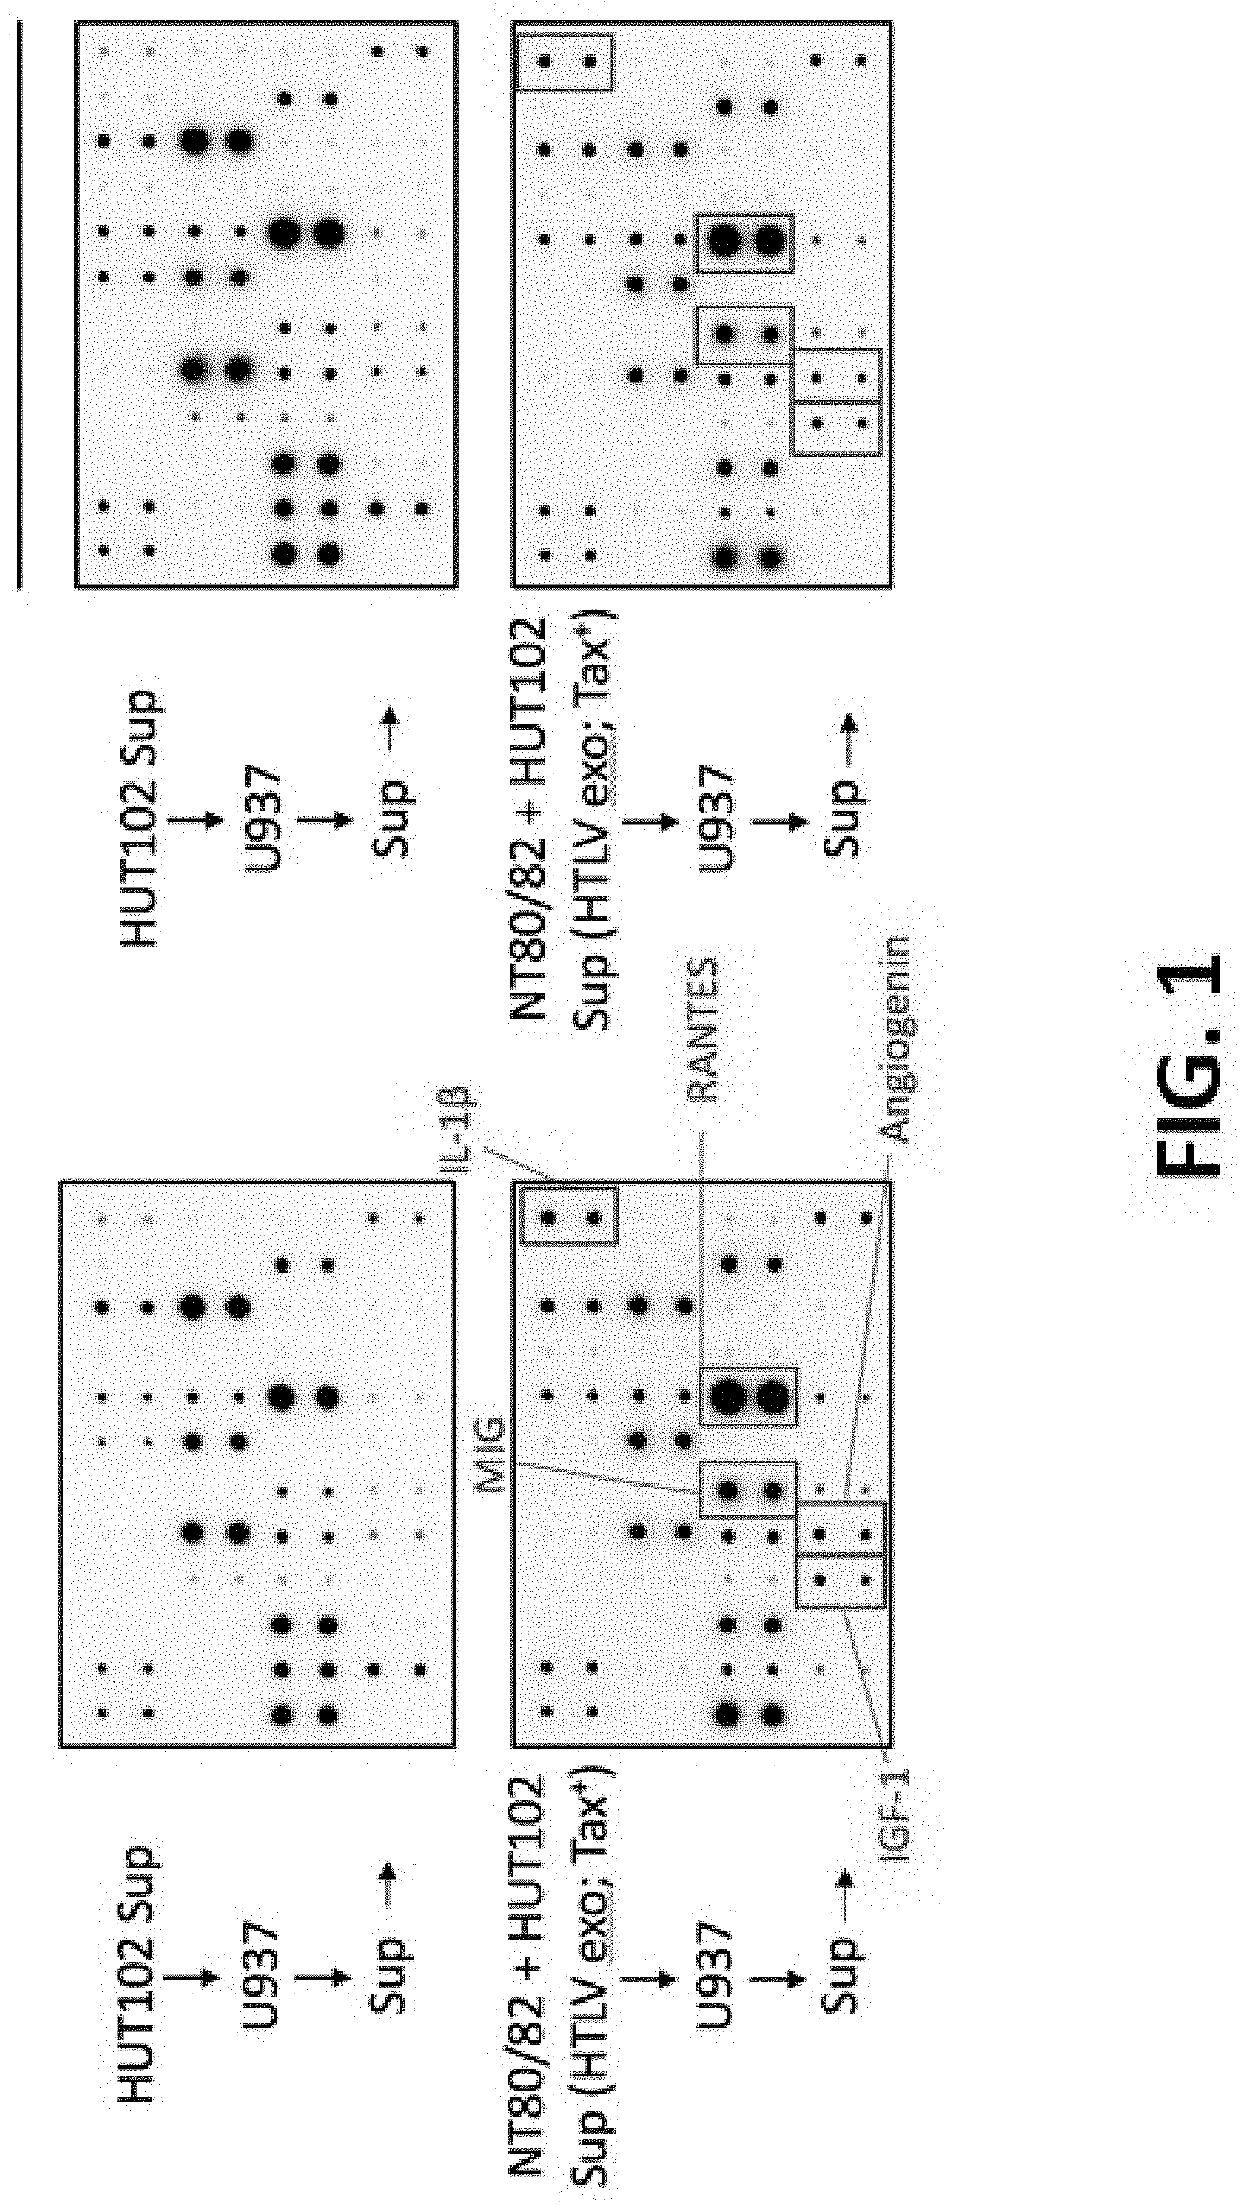 Method and System of Harvesting Extracellular Vesicles Using Hydrogel Particles for Later Delivery to, and Remodeling of, an Immune System